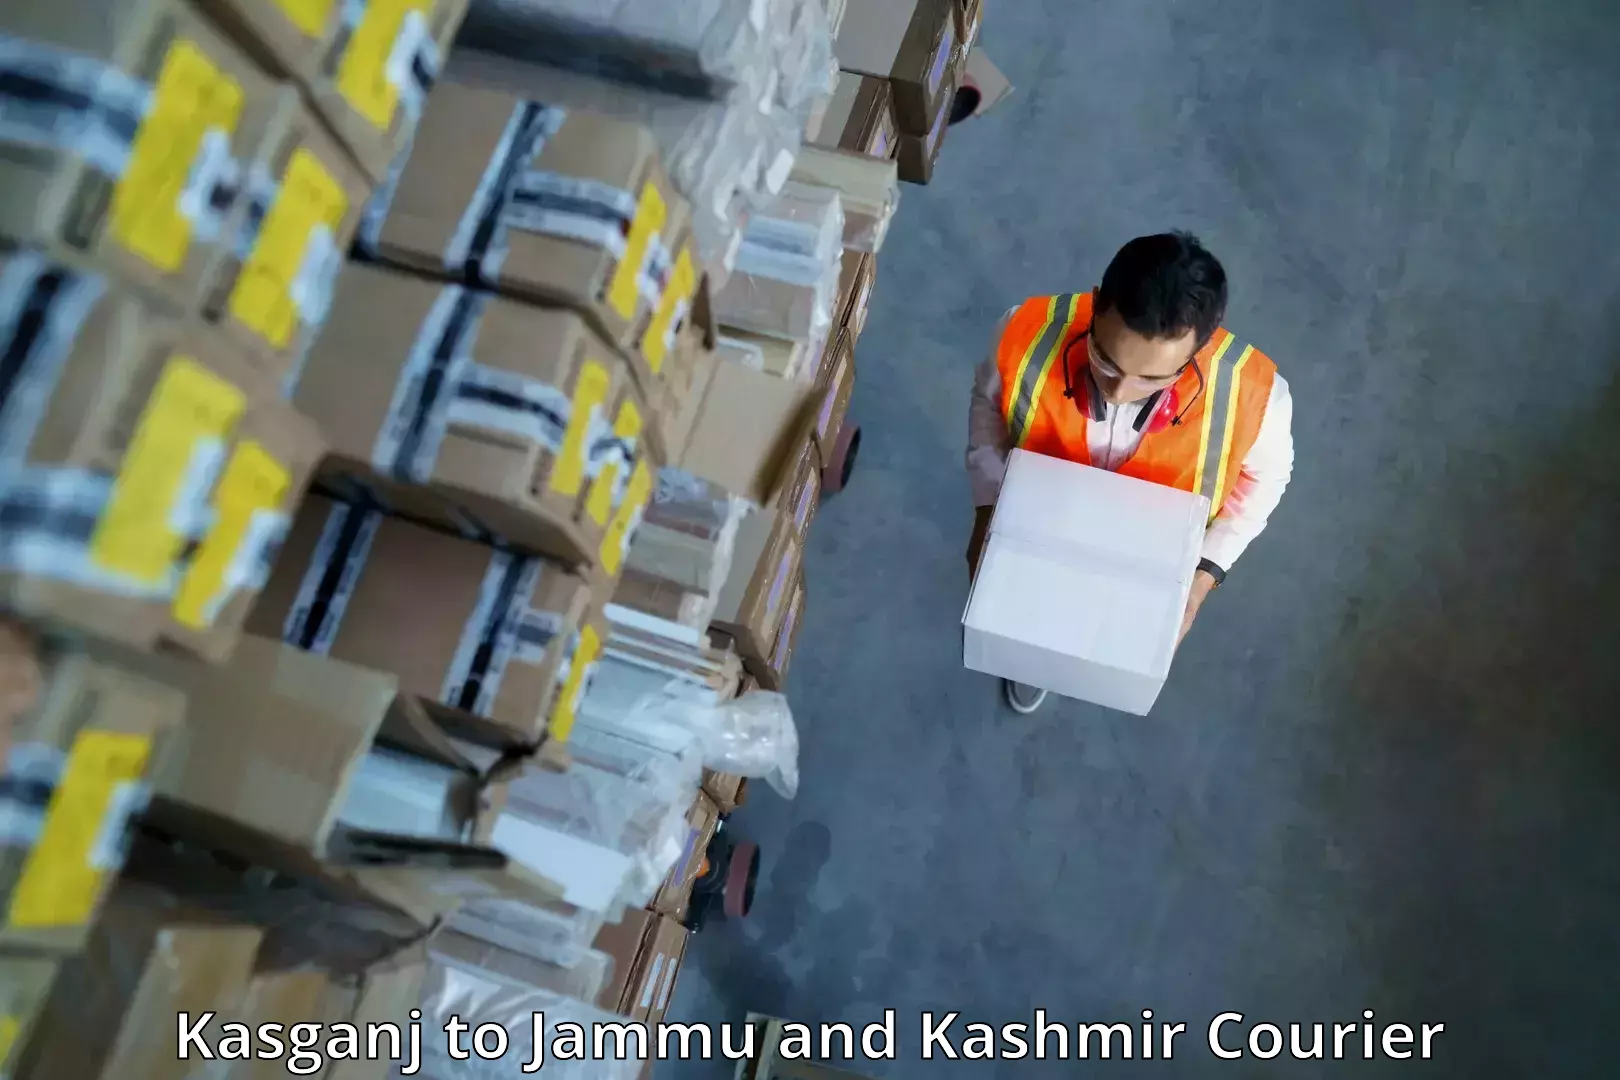 Flexible delivery schedules Kasganj to Jammu and Kashmir